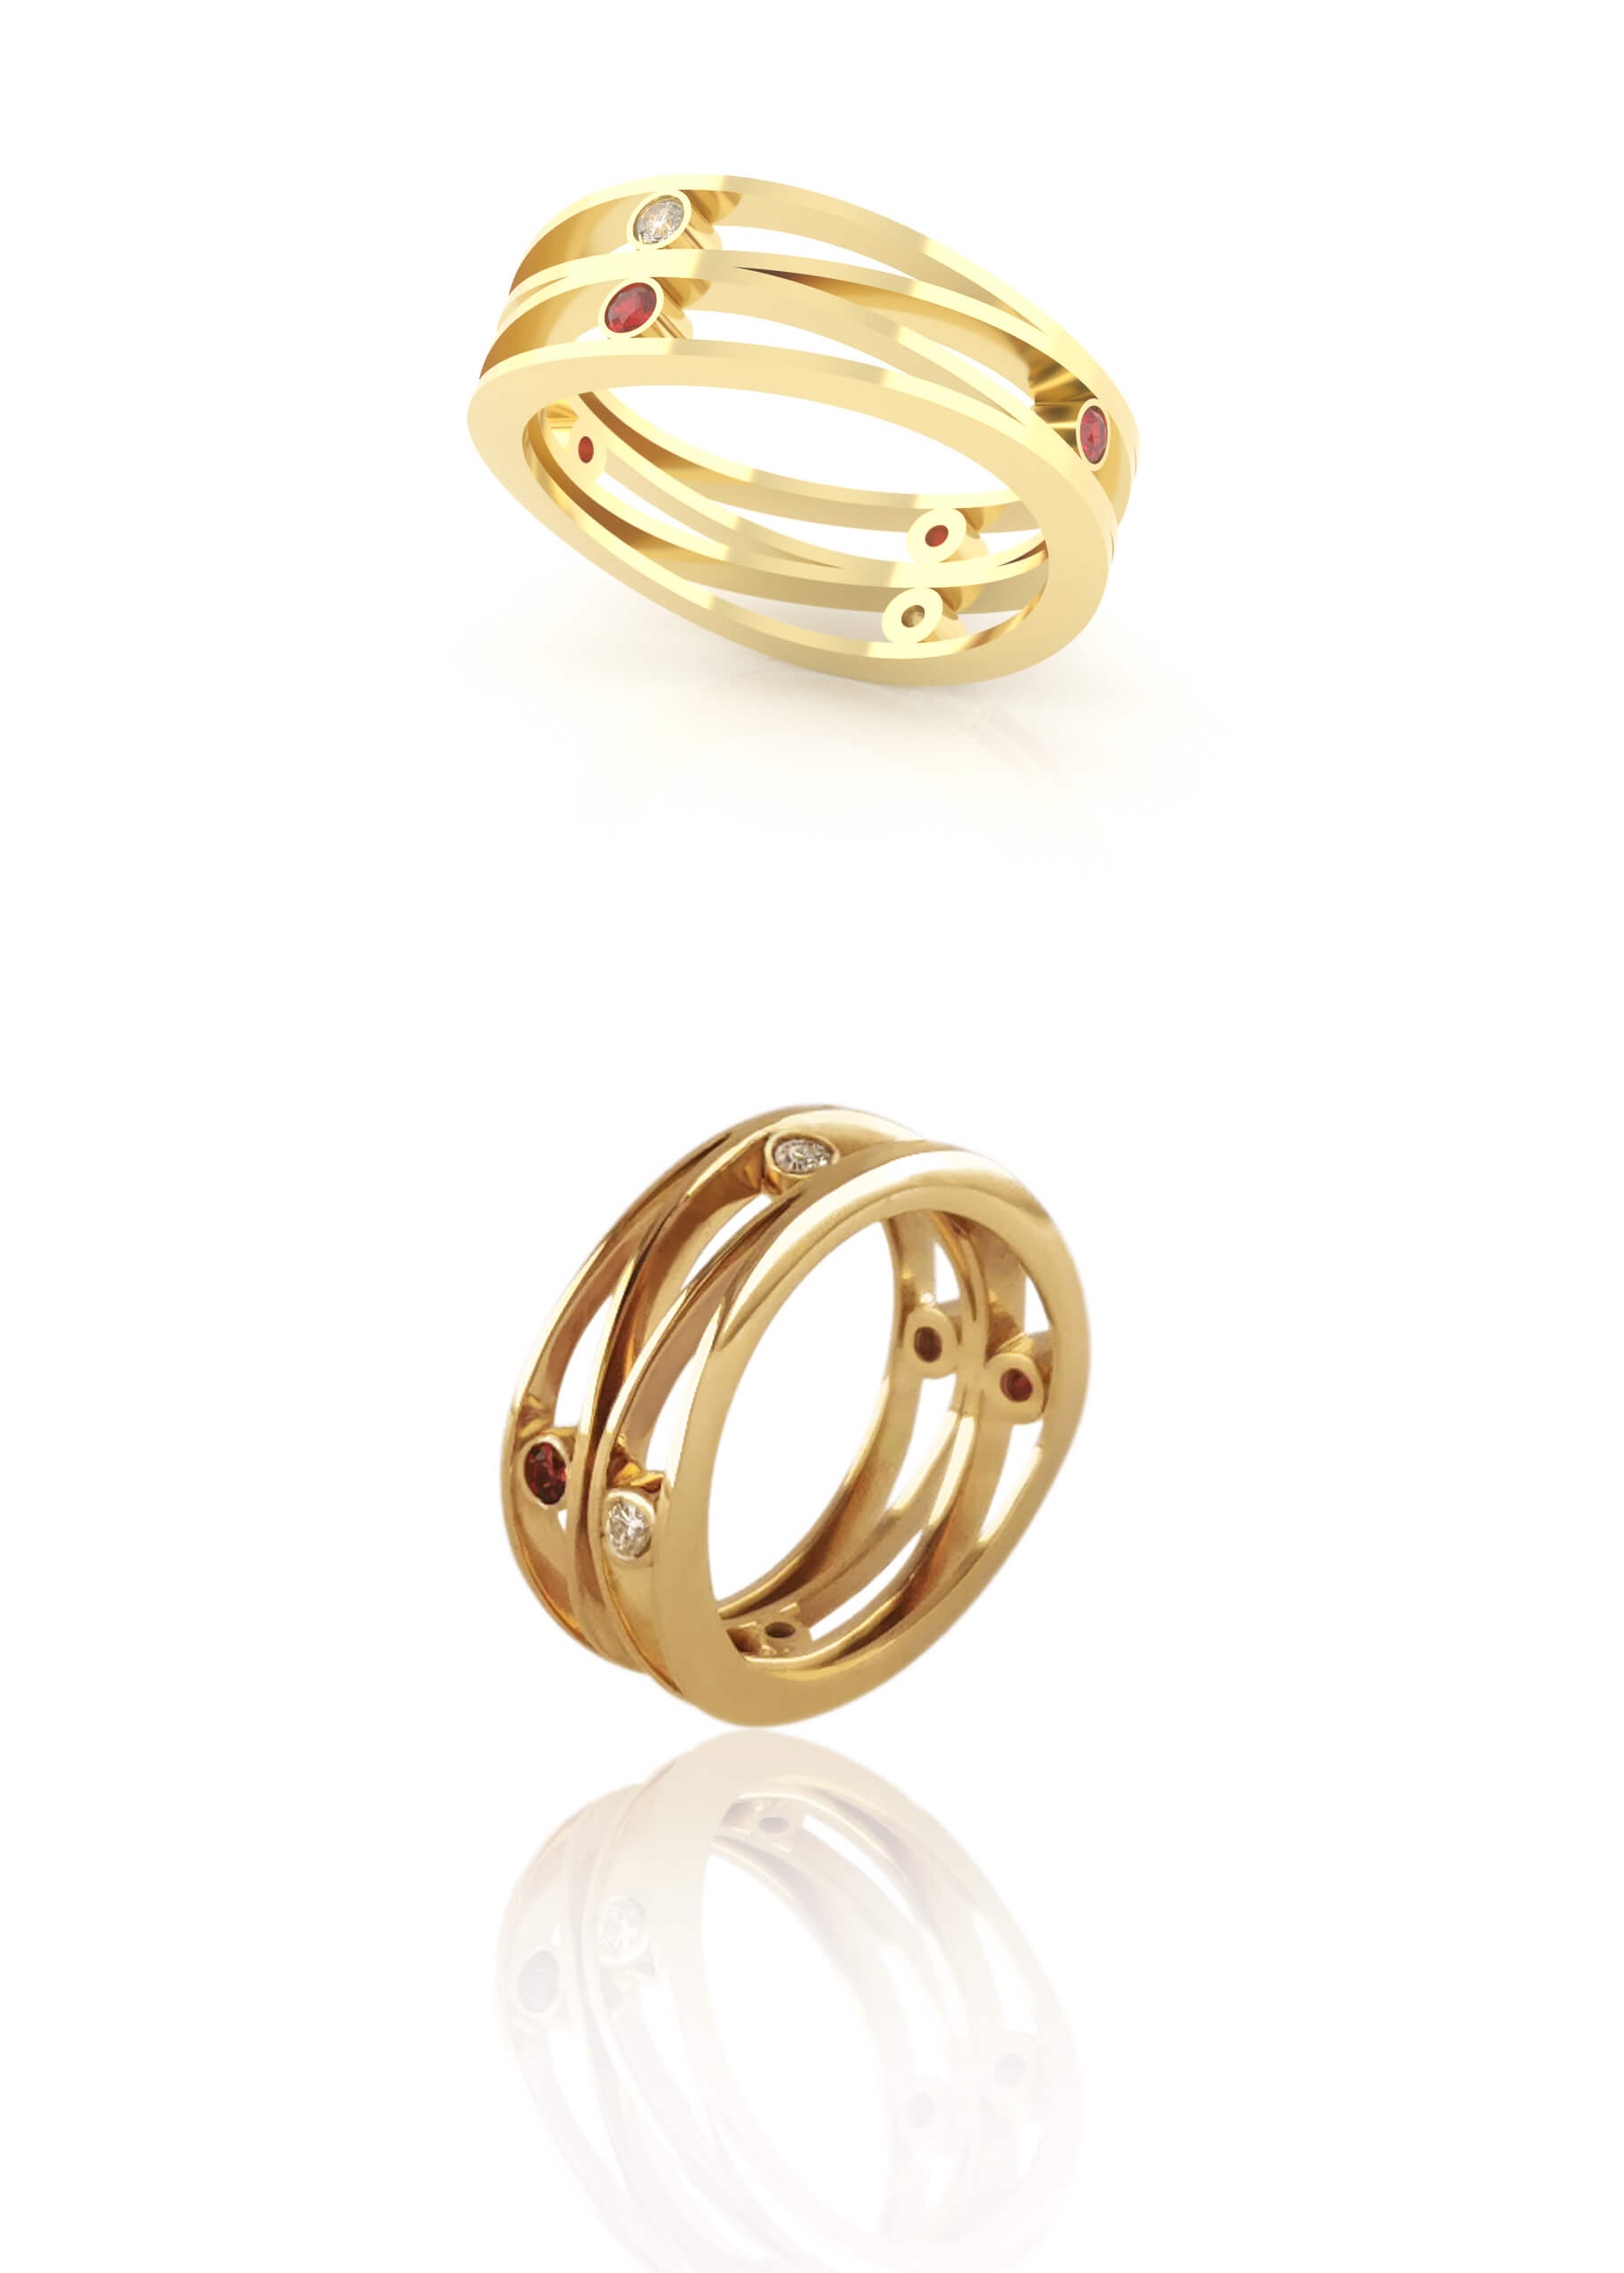 Two gold rings, one rendered  and the other one made